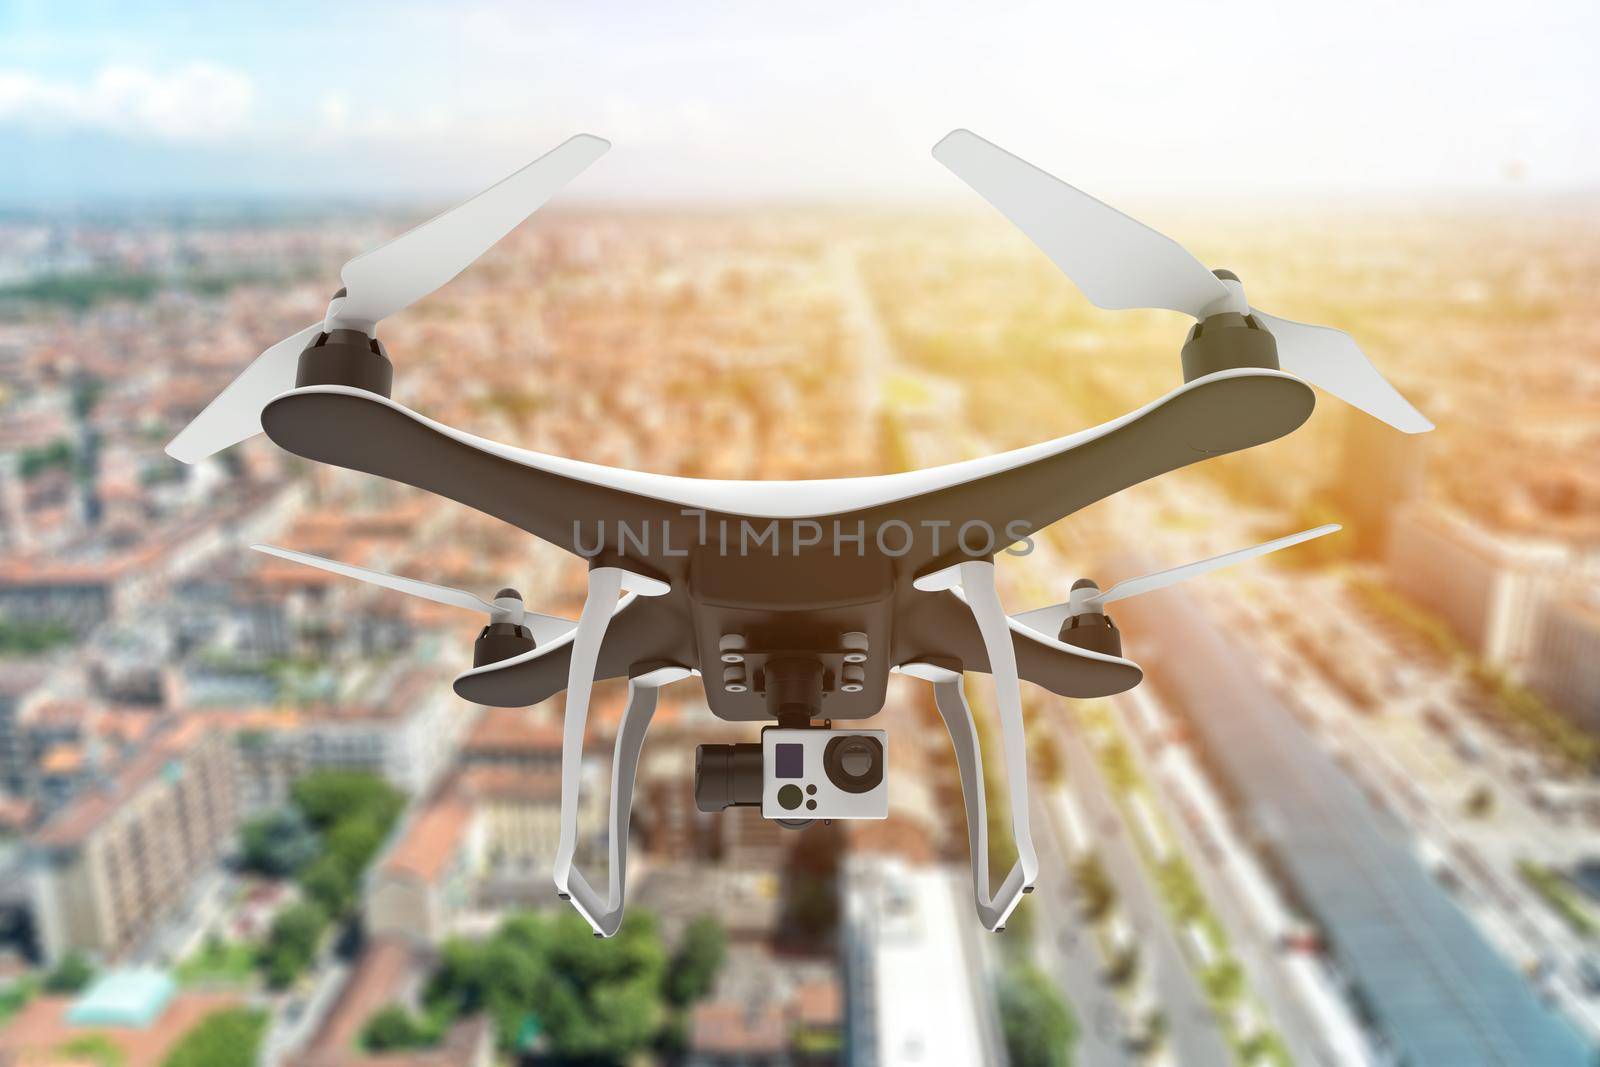 Drone with digital camera flying over a city by cla78